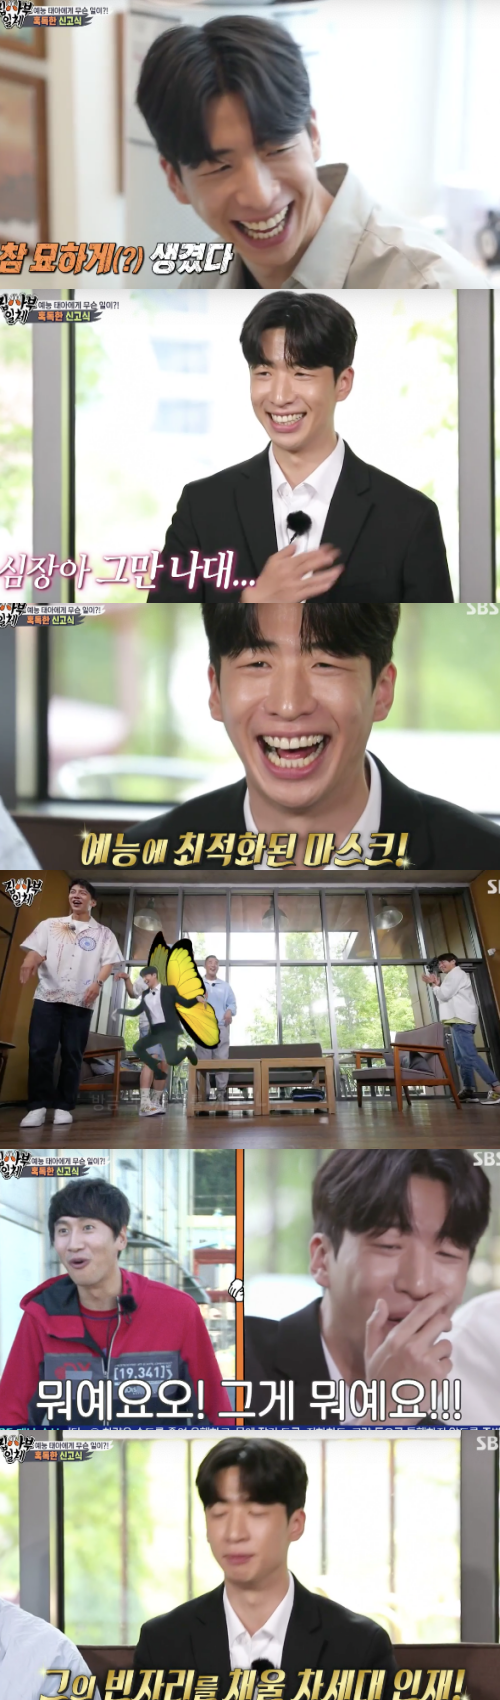 In All The Butlers, Yoo Soo-bin held a harsh entertainment ceremony.Lee Kwang-soo added fun from his first appearance as a resemblance to Candid Camera.The new youngest, Yoo Soo-bin, joined the SBS entertainment All The Butlers on the 11th.Lee Seung-gi arrived at the scene with Yang Se-hyeong and Kim Dong-Hyun, saying, I have three people, so I am good at mobility, but I am empty, I will buy more.The production team introduced the new youngest day of All The Butlers today, and the production team introduced Lee Sang-yoon, a first-year member, saying, I am not a well-known person, but I have a guarantor to prove that I am the right person for All The Butlers.Lee Sang-yoon said, I did not actually concentrate on acting, but I have not done it yet, and I am embarrassed to come back. He replied honestly to Lee Seung-gi, I have not done it yet while you were working.Lee Sang-yoon said, It is a very talented friend, it is very enormous, this friend is alto, and the castle is not good about the new member.)Lee Sang-yoon said, I know in my work, but the more I know, the more I do not think it is normal, there is a huge thing in it, it is really unique. Lee Seung-gi expected that if there are such jewels, it is talented.The new youngest person, known as Alto (?), and visuals, has been released.The members said that they were entertainment mouths with only the lip disclosure, and when the youngest actor was revealed to be Yoo Soo-bin, they were glad to say light-shaped ornaments and expected entertainment fetus recognition, never seen in entertainment.At this time, Yoo Soo-bin was called to actor Bae Suzy, a friendship that followed a drama relationship.Lee Sang-yoon says, Friend who is friendly with the actors who have worked.Then, when Bae Suzy said, What do I do usually laugh?, Bae Suzy said, It is funny when I fart.Lee Seung-gi said, Do you fart with Bae Suzy? Kim Dong-Hyun and Yang Se-hyeong said, This personality is so good.Ill try to fart, added Yoo Soo-bin, who also shared his personal prayers and copied Lee Kwang-soo vocalizations equally.The members fell in love with the idea, saying, The more you see, the more attractive you are.Above all, Yoo Soo-bin was portrayed as serious, left behind in a playful figure, especially with a note that was written like a crack.Yoo Soo-bin showed a sincere and serious appearance to make exclamation note notebook for All The Butlers, saying, I want to fill this notebook with exclamation marks with my brothers and question marks.In earnest, Yoo Soo-bin met with the members and held an entertainment declaration ceremony.The members called Kim Soo-mi, saying, Lets call Kim Soo-mi, and if you come to the new member, you will have a meal. Kim Soo-mi immediately accepted it.Then, they all gathered at Kim Soo-mis office.Naturally, the members planned Candid Camera for the final entertainment ceremony of Yoo Soo-bin, along with Kim Soo-mi.Kim Soo-mi set up that there was a soy sauce that came down to the family generations, and Yoo Soo-bin led to break it.The camera went as planned, Kim Soo-mi even spread tears, a situation that became serious enough to stop filming; Yoo Soo-bin was embarrassed, shaking his head.Kim Soo-mi even set up to leave the filming site, and from the first shooting, Yoo-bin was in a hurry. Kim Soo-mi came in again, and Yoo-bin said, I have something to show you.I was relieved to see why this happened, said Yoo Soo-bin.Kim Soo-mi welcomed the new youngest, Yoo Soo-bin, as well as the members, saying, I picked it well from the youngest place while watching the pure and honest Yoo-bin.Capture All The Butlers Broadcast Screen